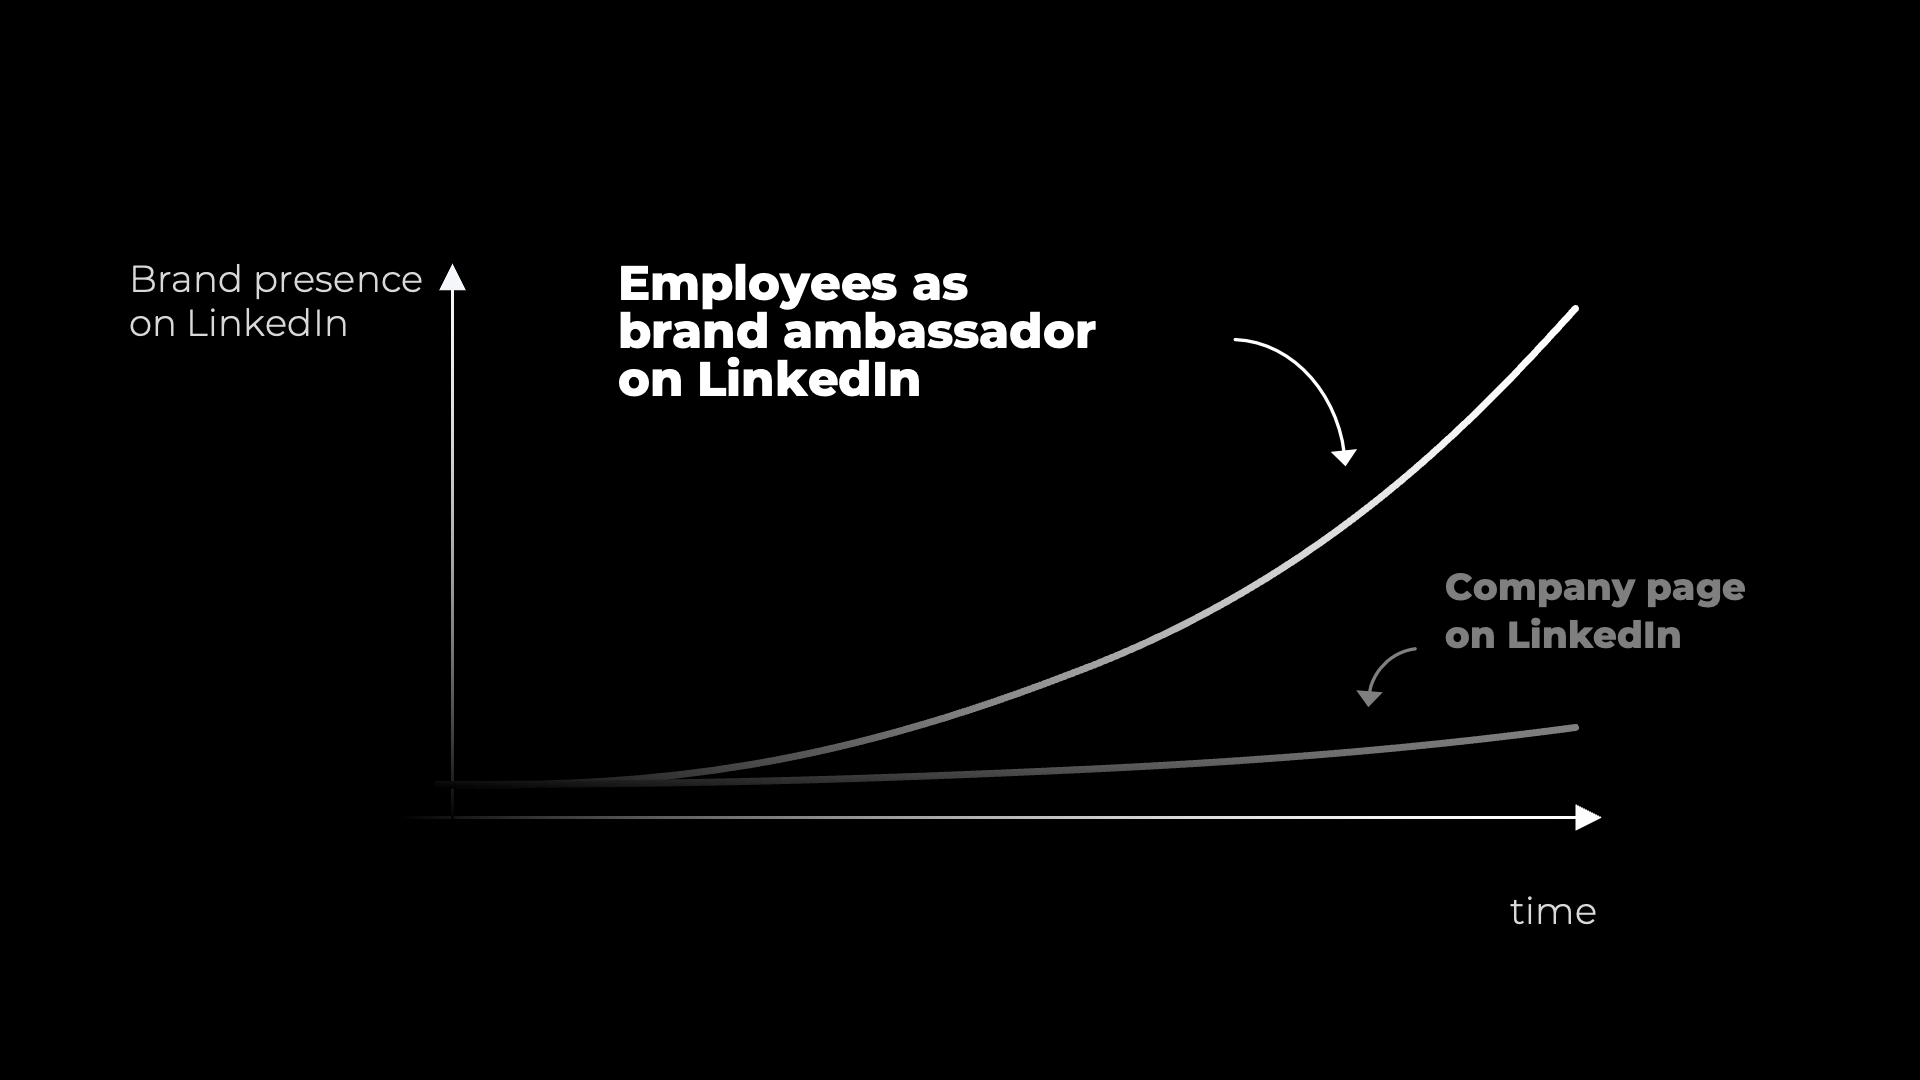 growth of Brand ambassador in relation to Company Page. LinkedIn